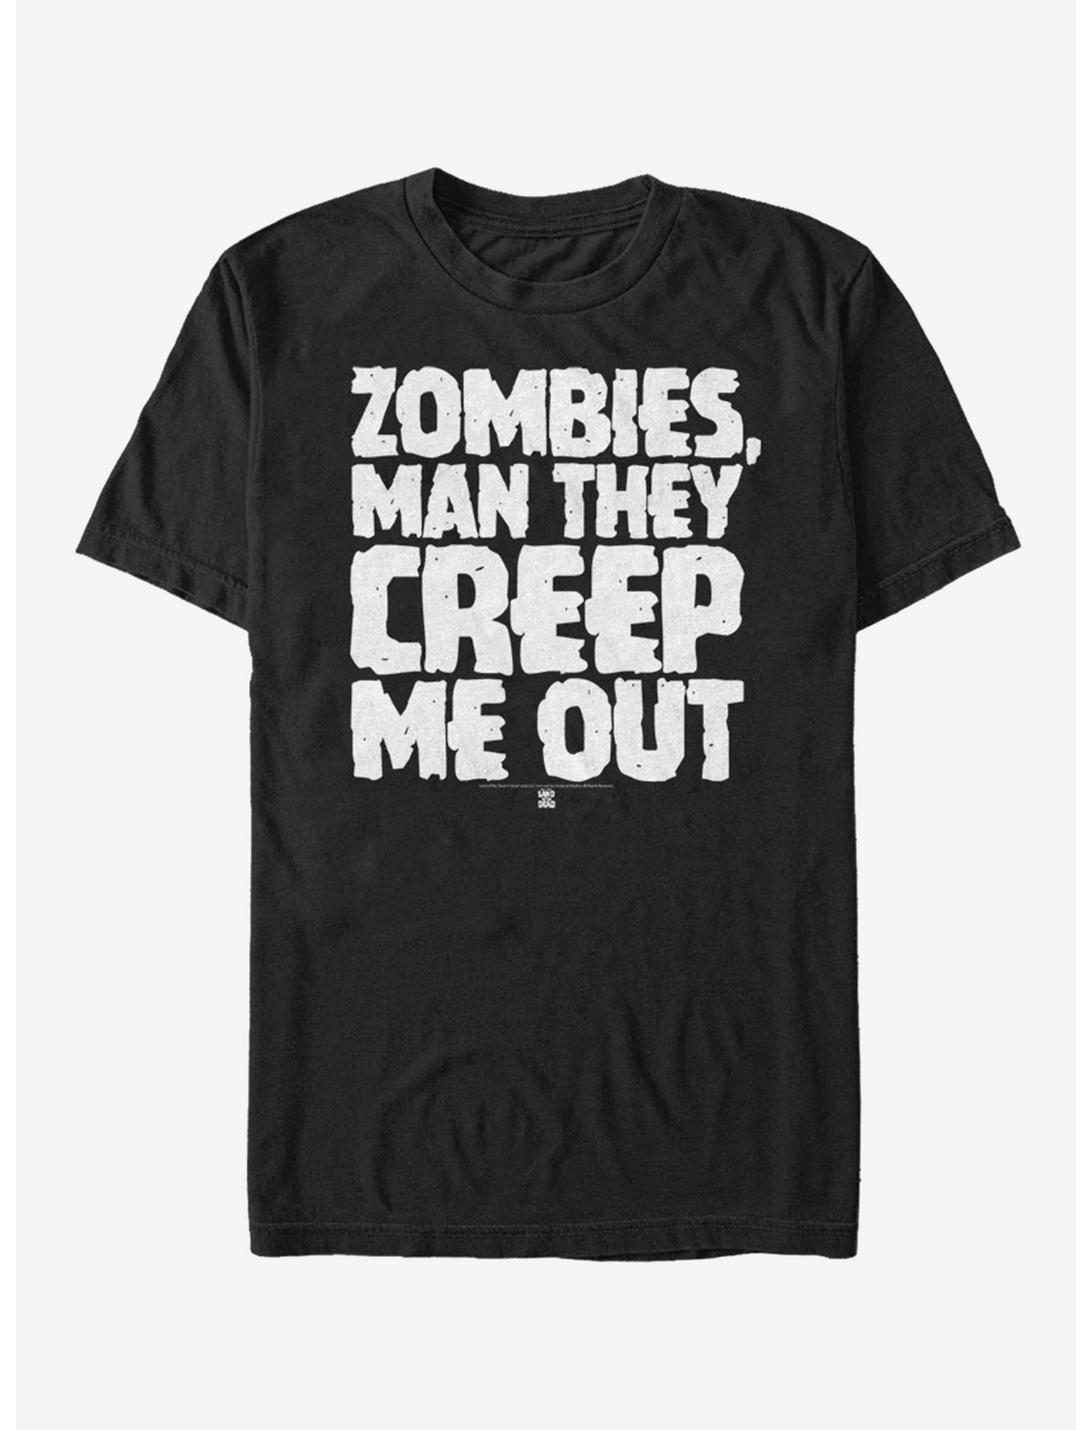 Land of the Dead Zombies Creep Me Out T-Shirt, BLACK, hi-res